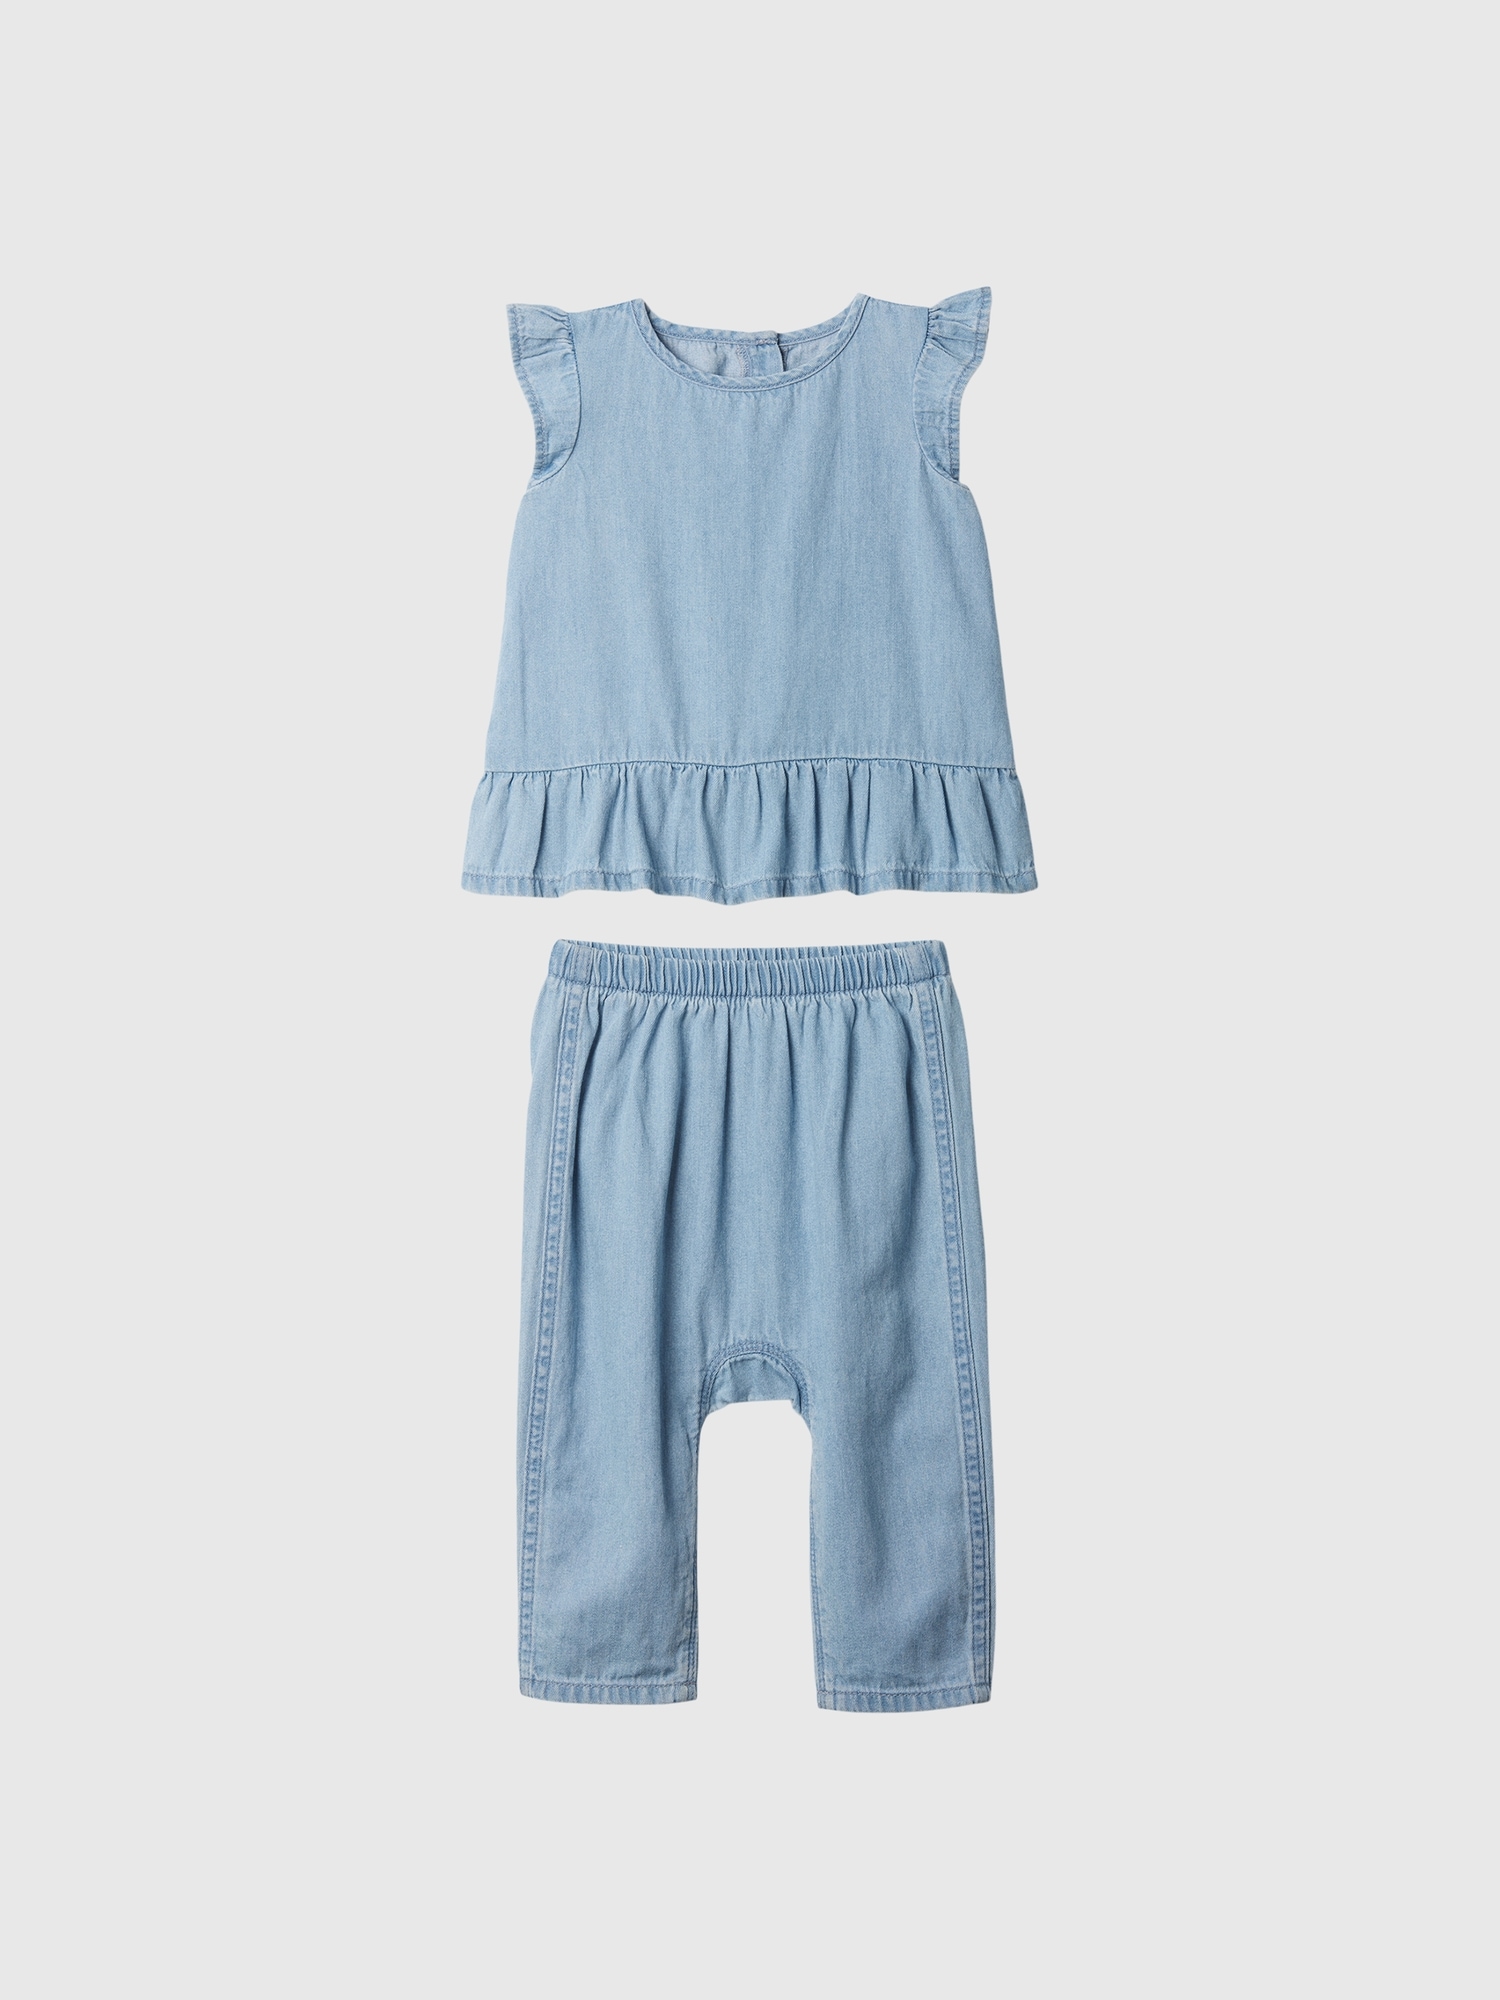 Baby Denim Two-Piece Outfit Set